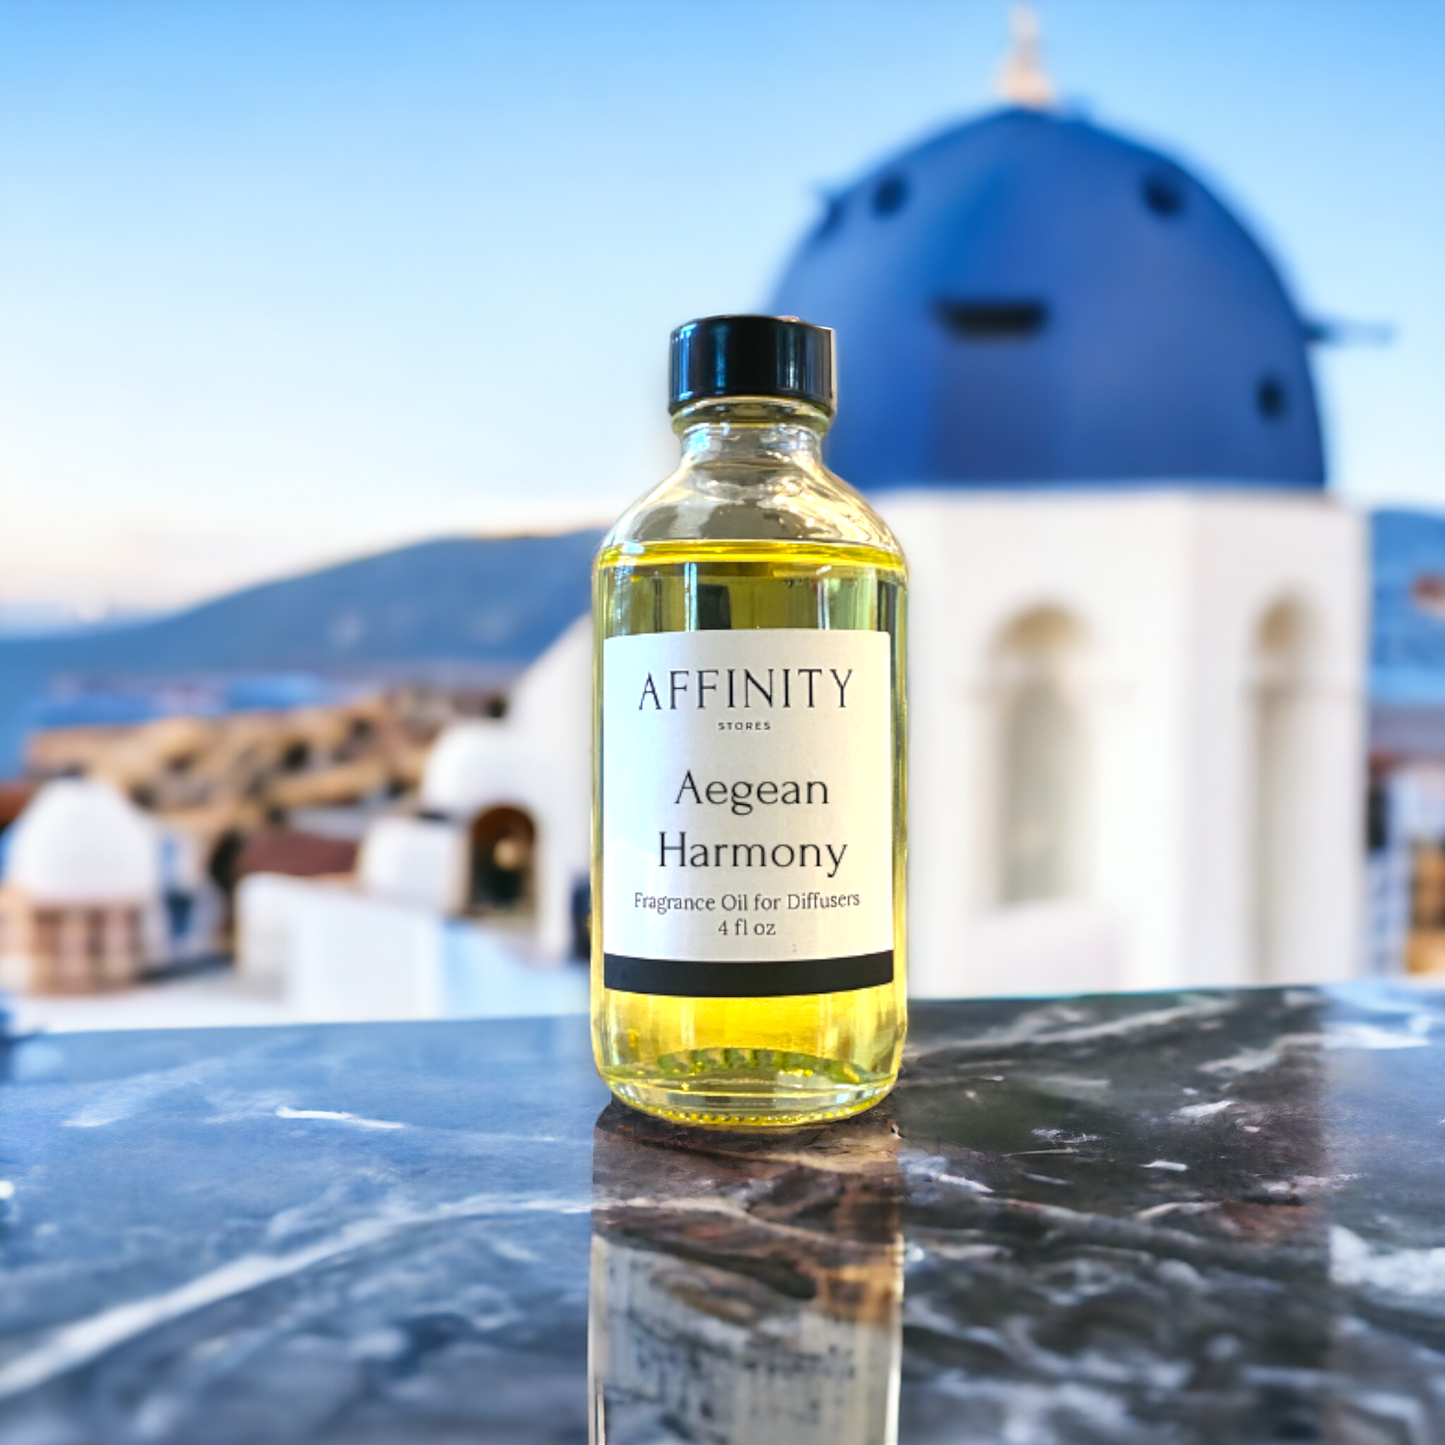 Affinity Stores Fragrance Oil "Aegean Harmony" - Inspired by Santorini, Greece